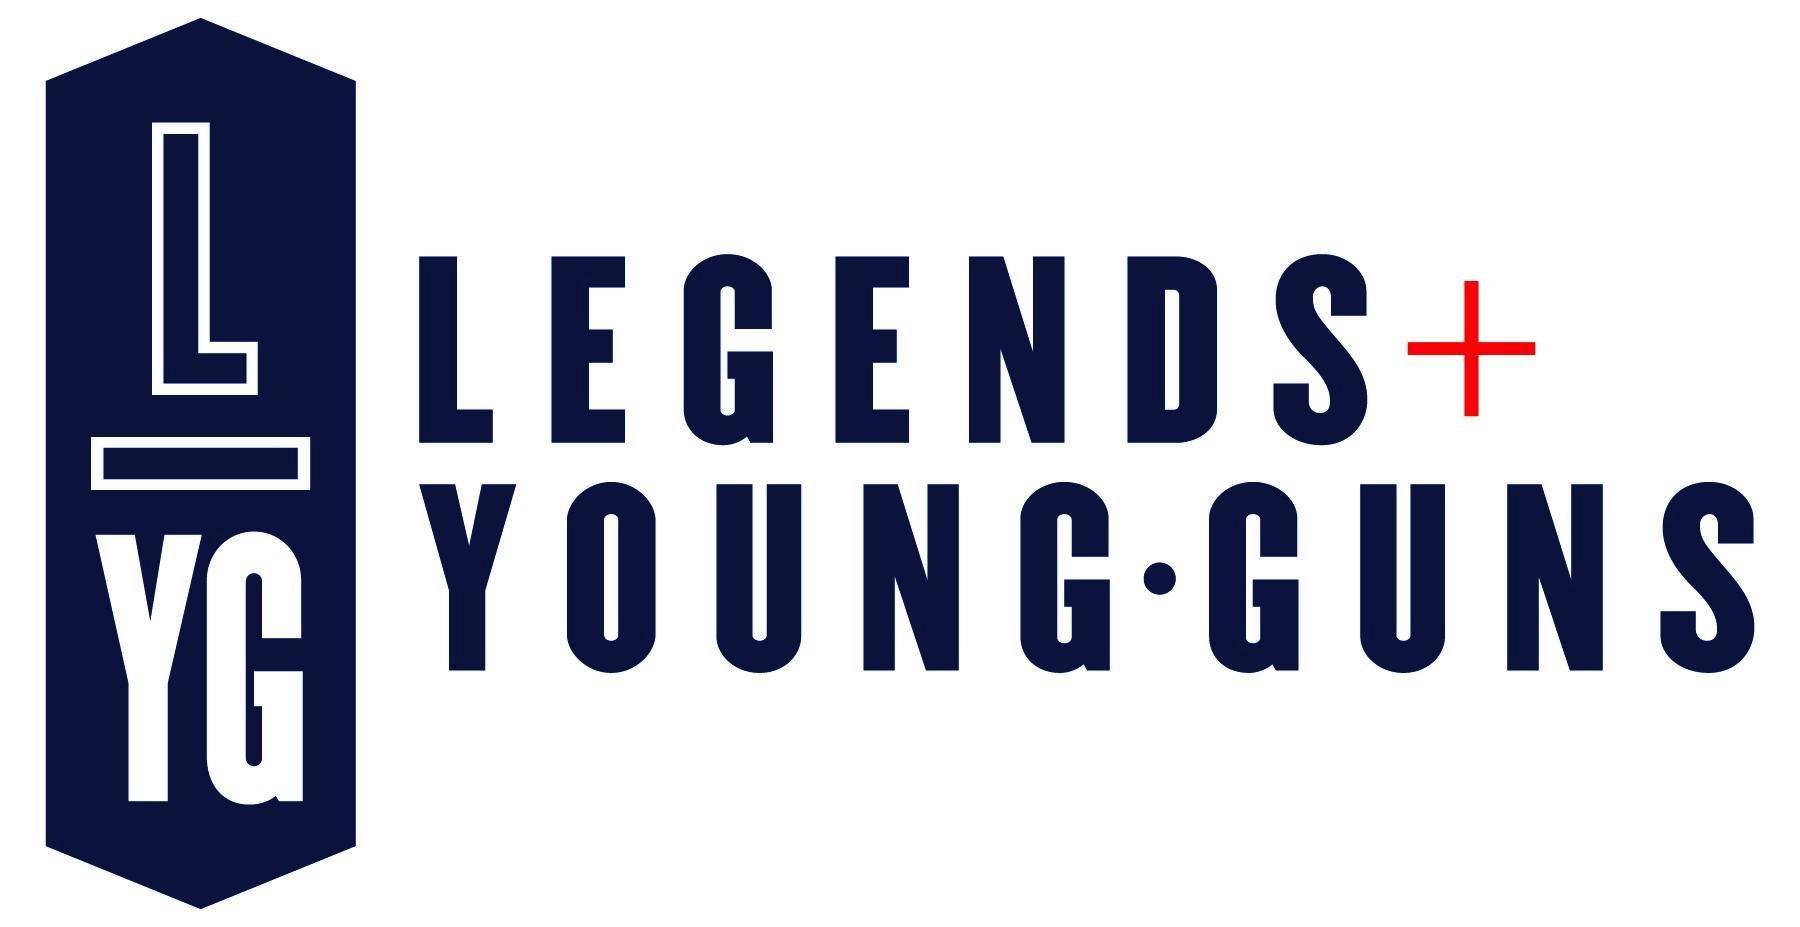 The Inaugural Legends and Young Guns Will Square Off at Woodland Hills on Thursday, April 26